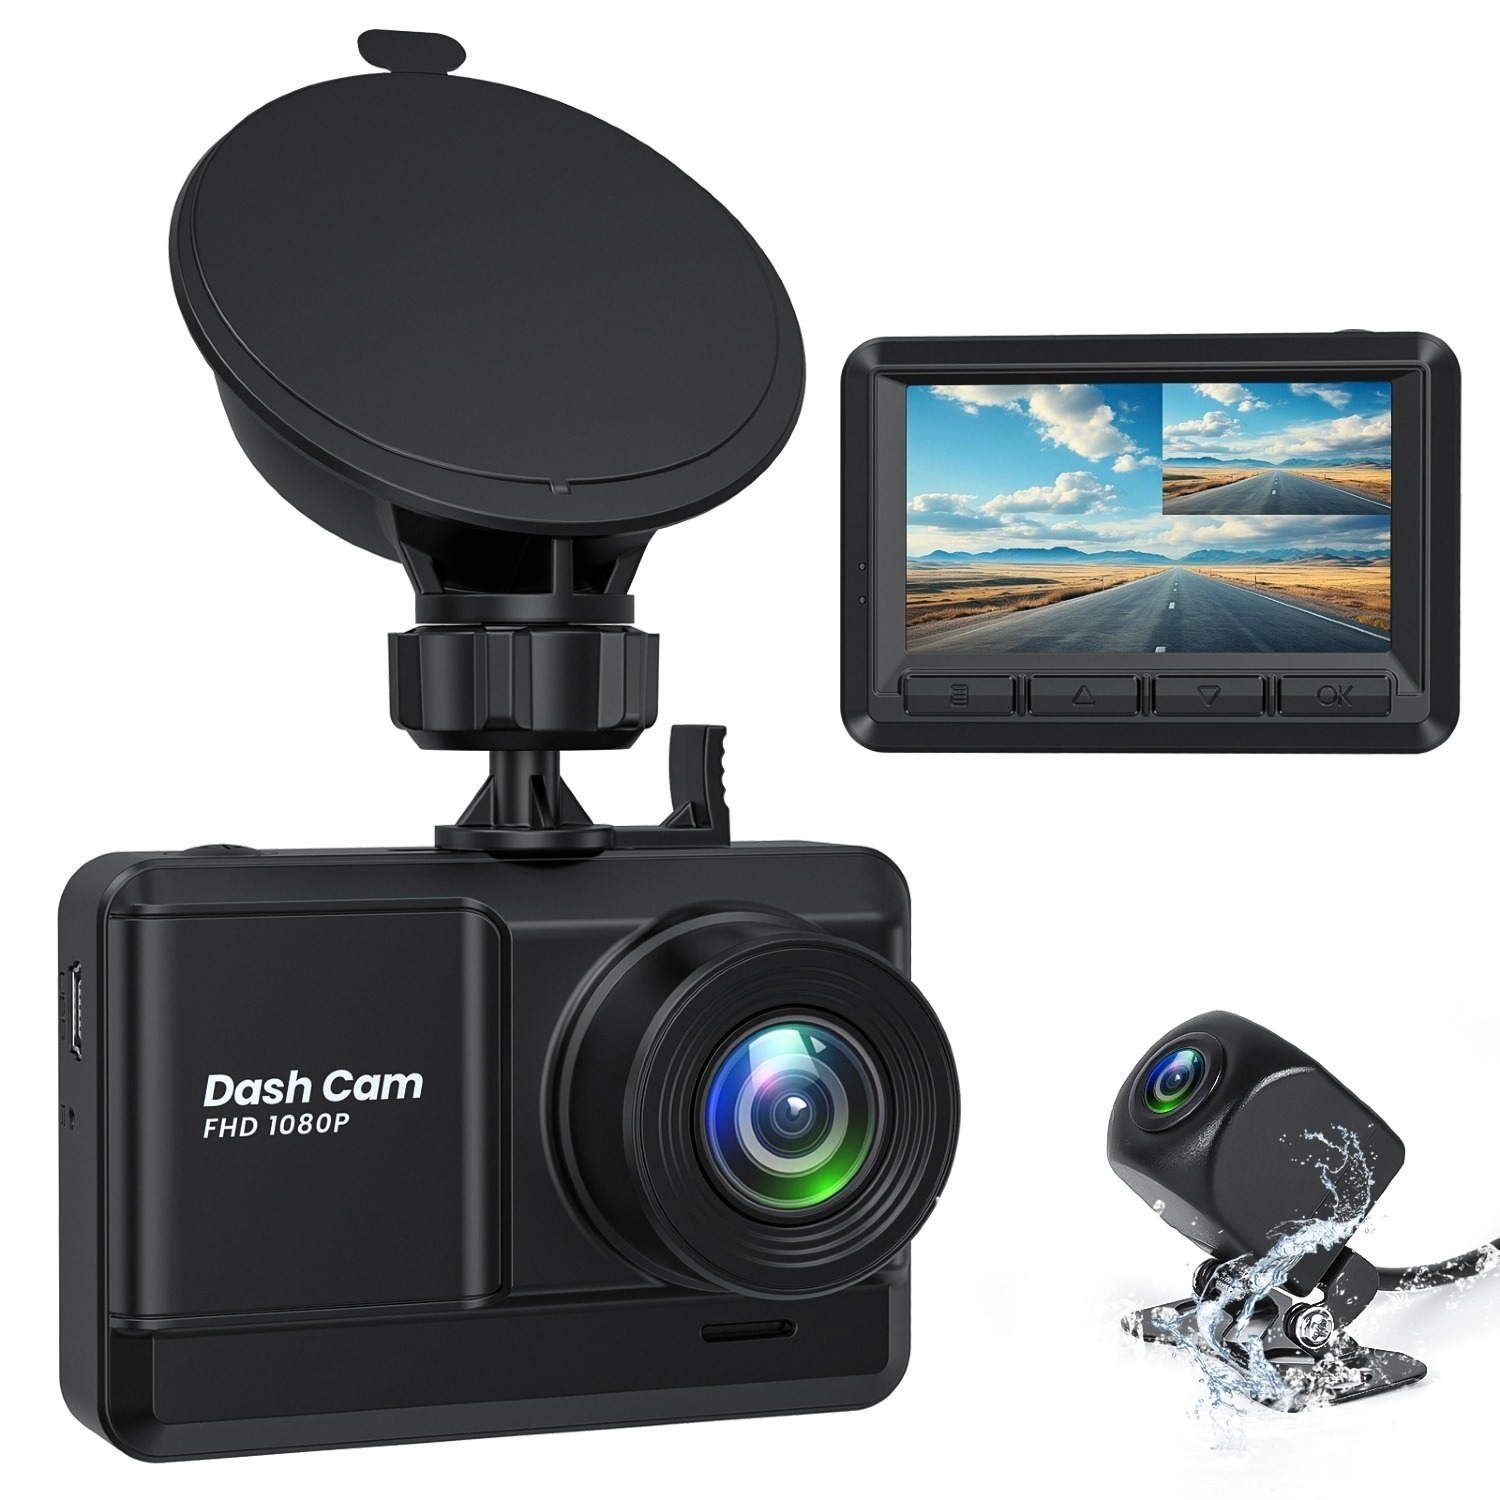 AVAPOW Dash Cam Front and Rear, Dash Cam 1080P Full HD w/ 2.45" IPS Screen, Night Vision, Loop Recording $32.99 + Free Shipping w/ $35+